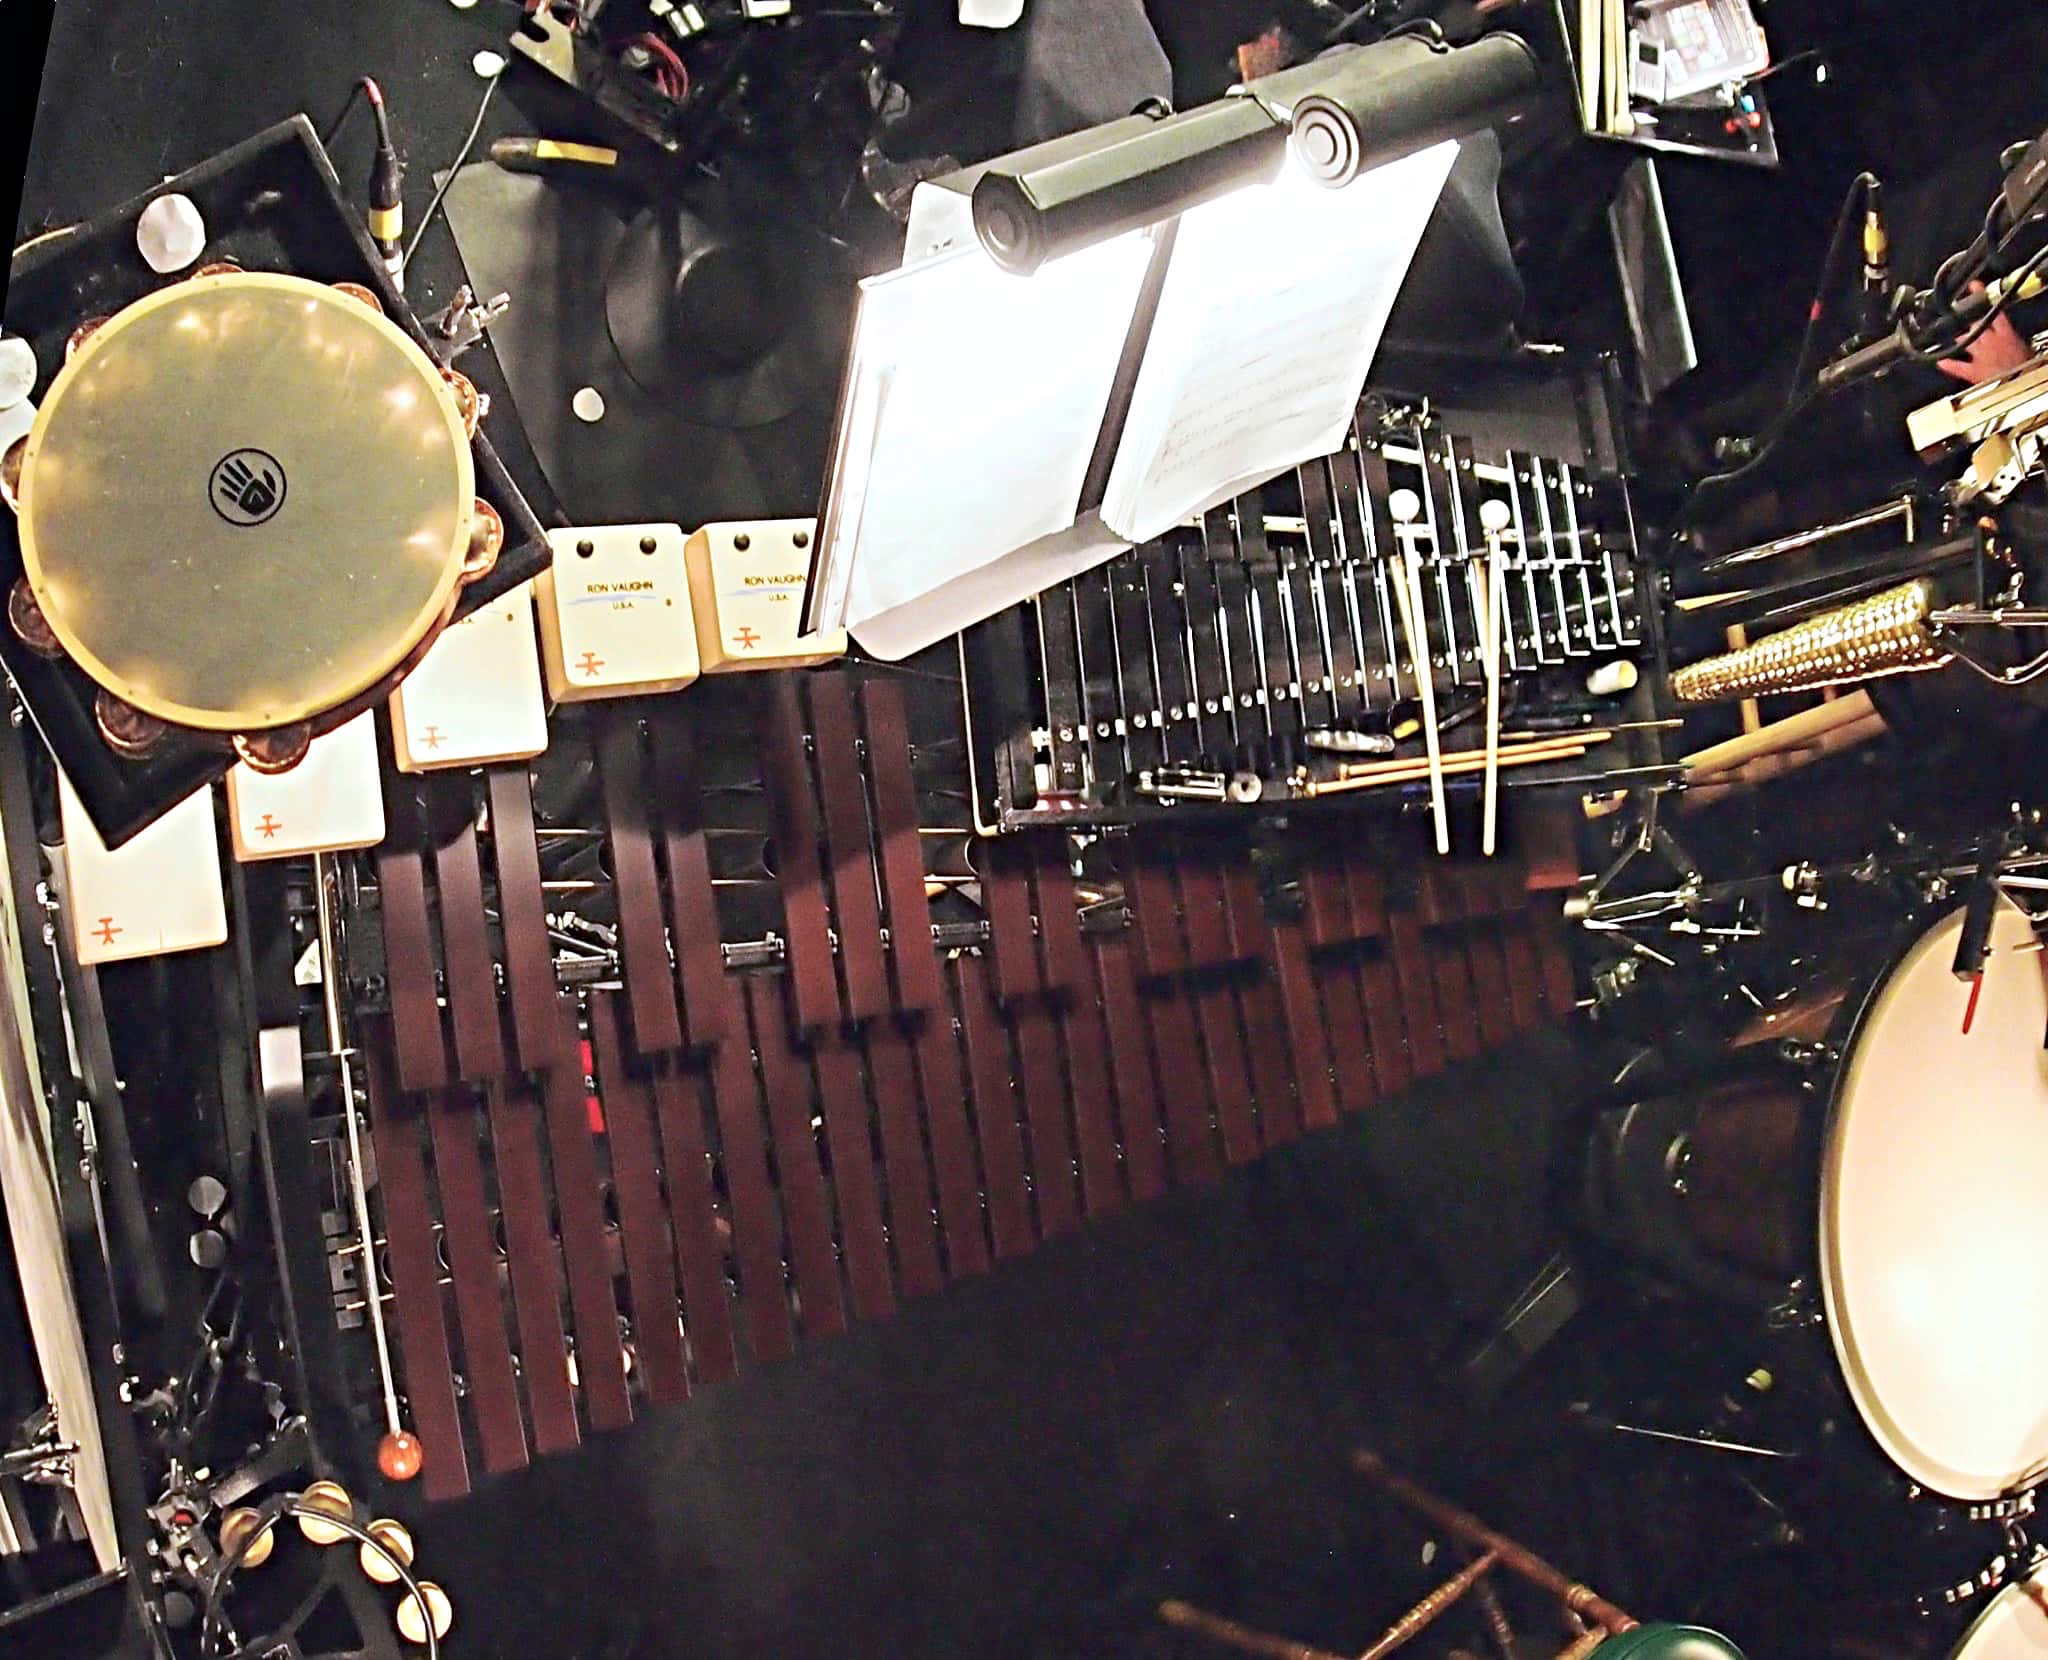 Bill Hayes' percussion setup for the Broadway production of Cinderella at the Broadway Theatre.